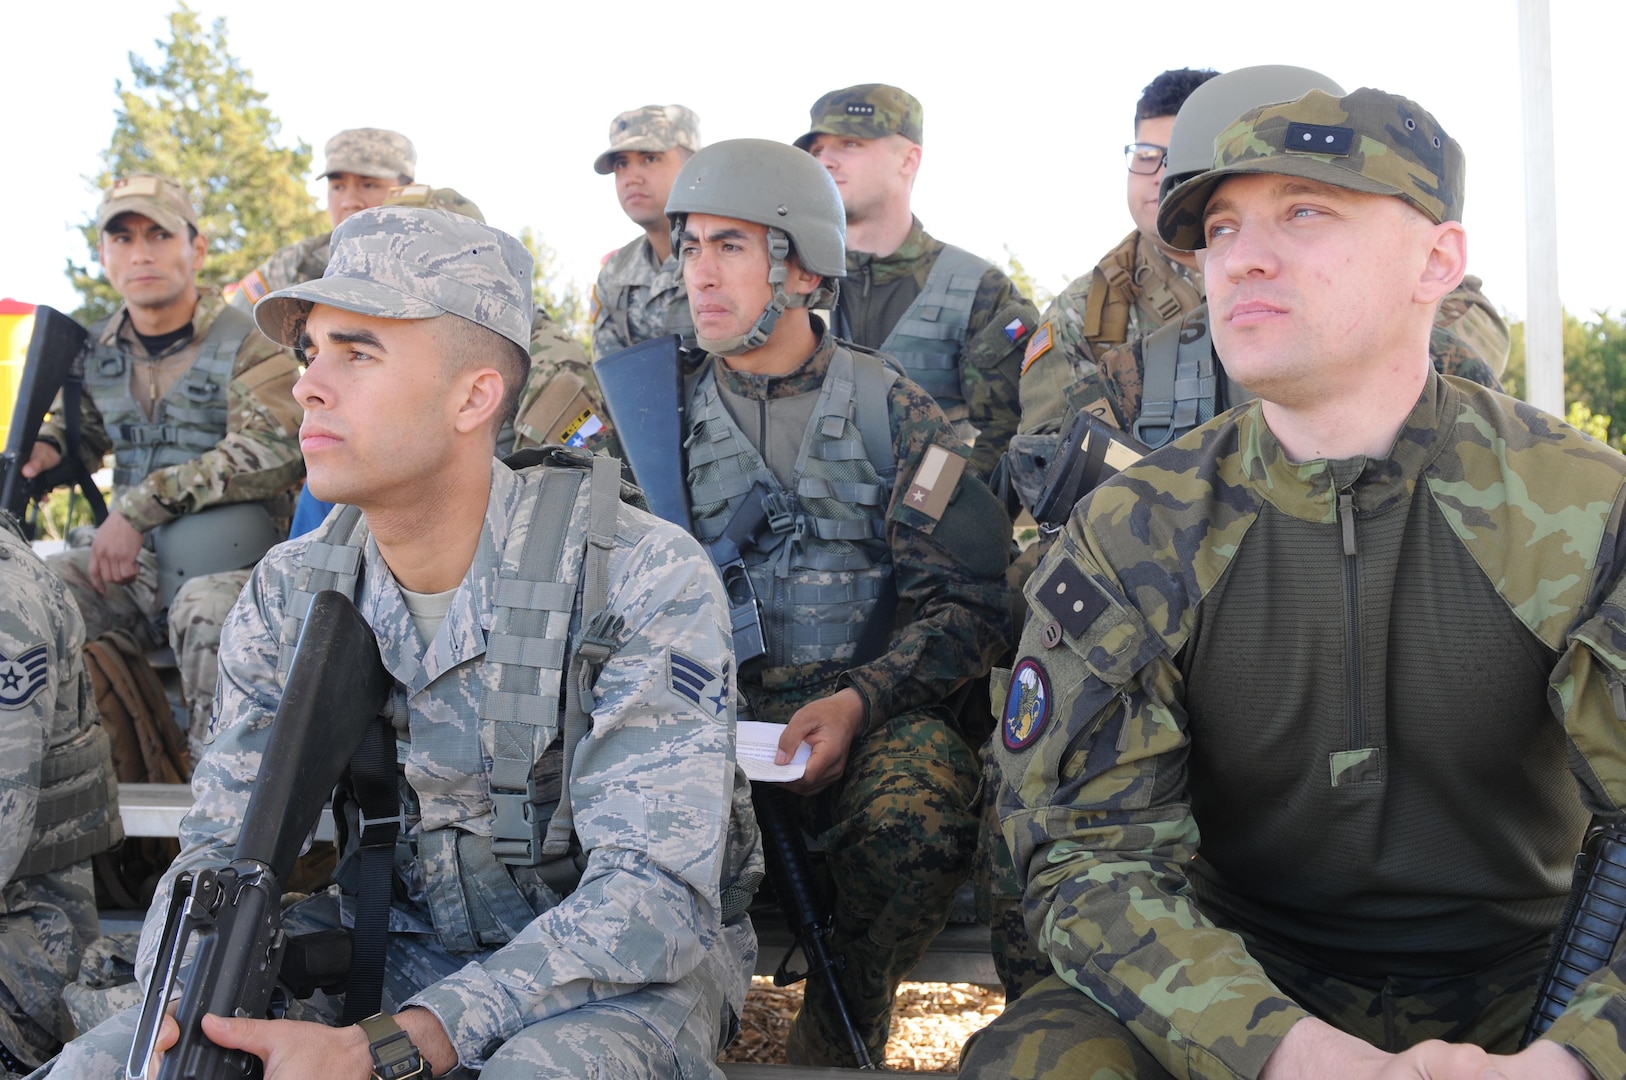 Texas National Guard Soldiers and Airmen receive a safety brief along with with Czech and Chilean service members at the M4 qualification event as part of the fifth annual Texas Military Department Best Warrior Competition, at Camp Swift near Bastrop, Texas, March 3, 2017. This year's Best Warrior Competition was the second time Chilean soldiers participated and the first time for soldiers from the Czech Republic as part of Texas Military Department's initiative to develop relations with foreign partners. 